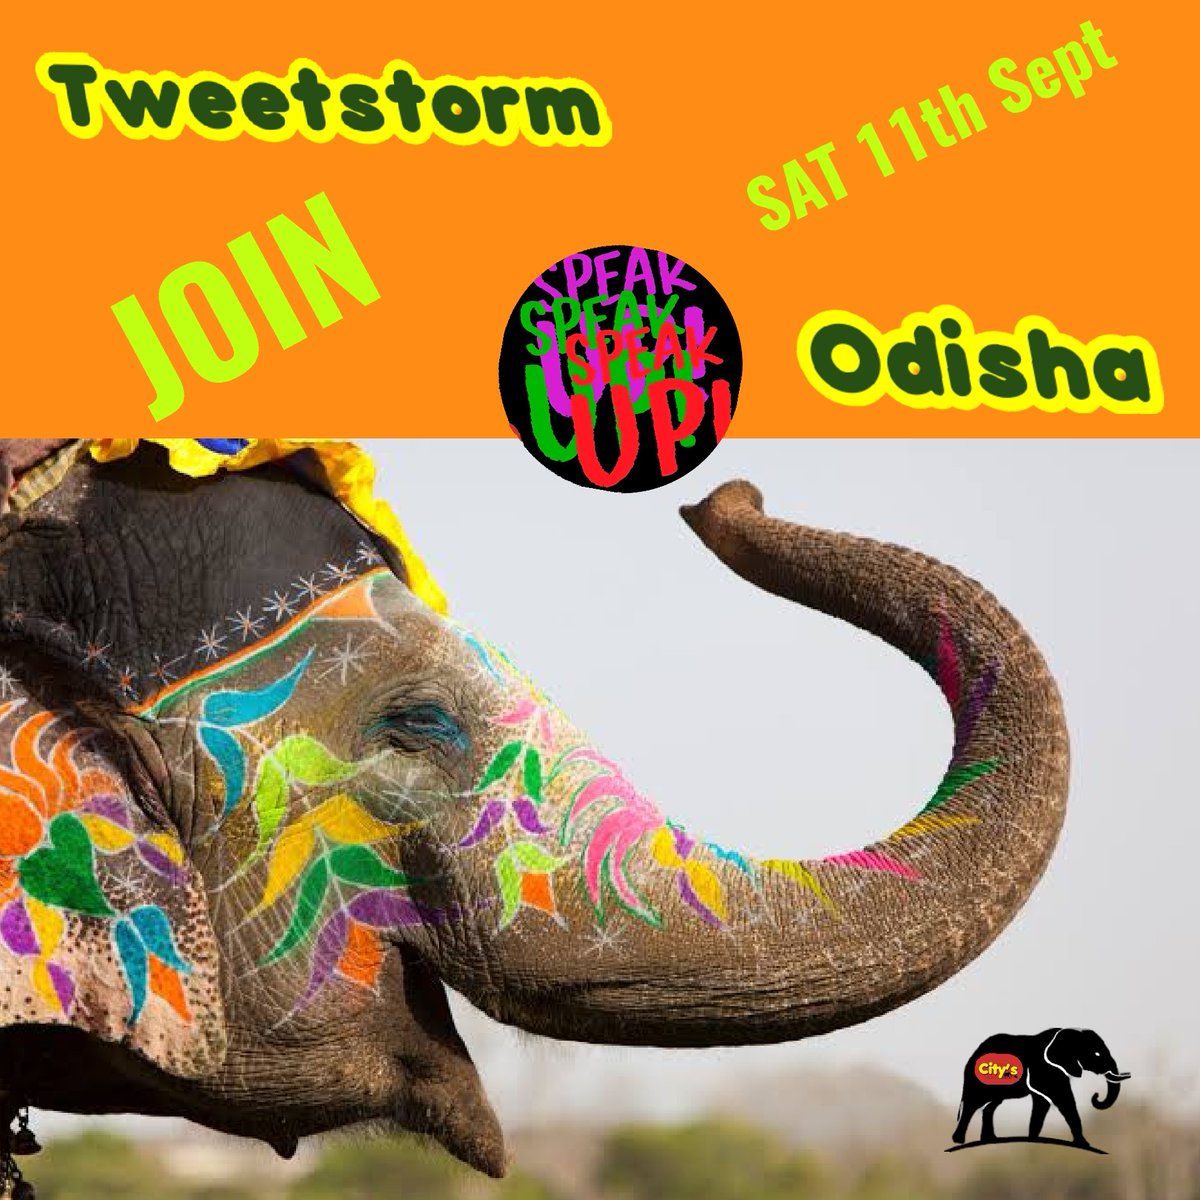 🇮🇳🇮🇳🇮🇳Tweetstorm🐘🇮🇳🇮🇳🇮🇳

Saturday 11th Sept we tweet for the elephants in Odisha/India.

#SaveOdishaElephants
#RightToPassage
#SaveNaturalForest
#NativeVoices
#United4Elephants

Just a short reminder.
Details are yet to come.